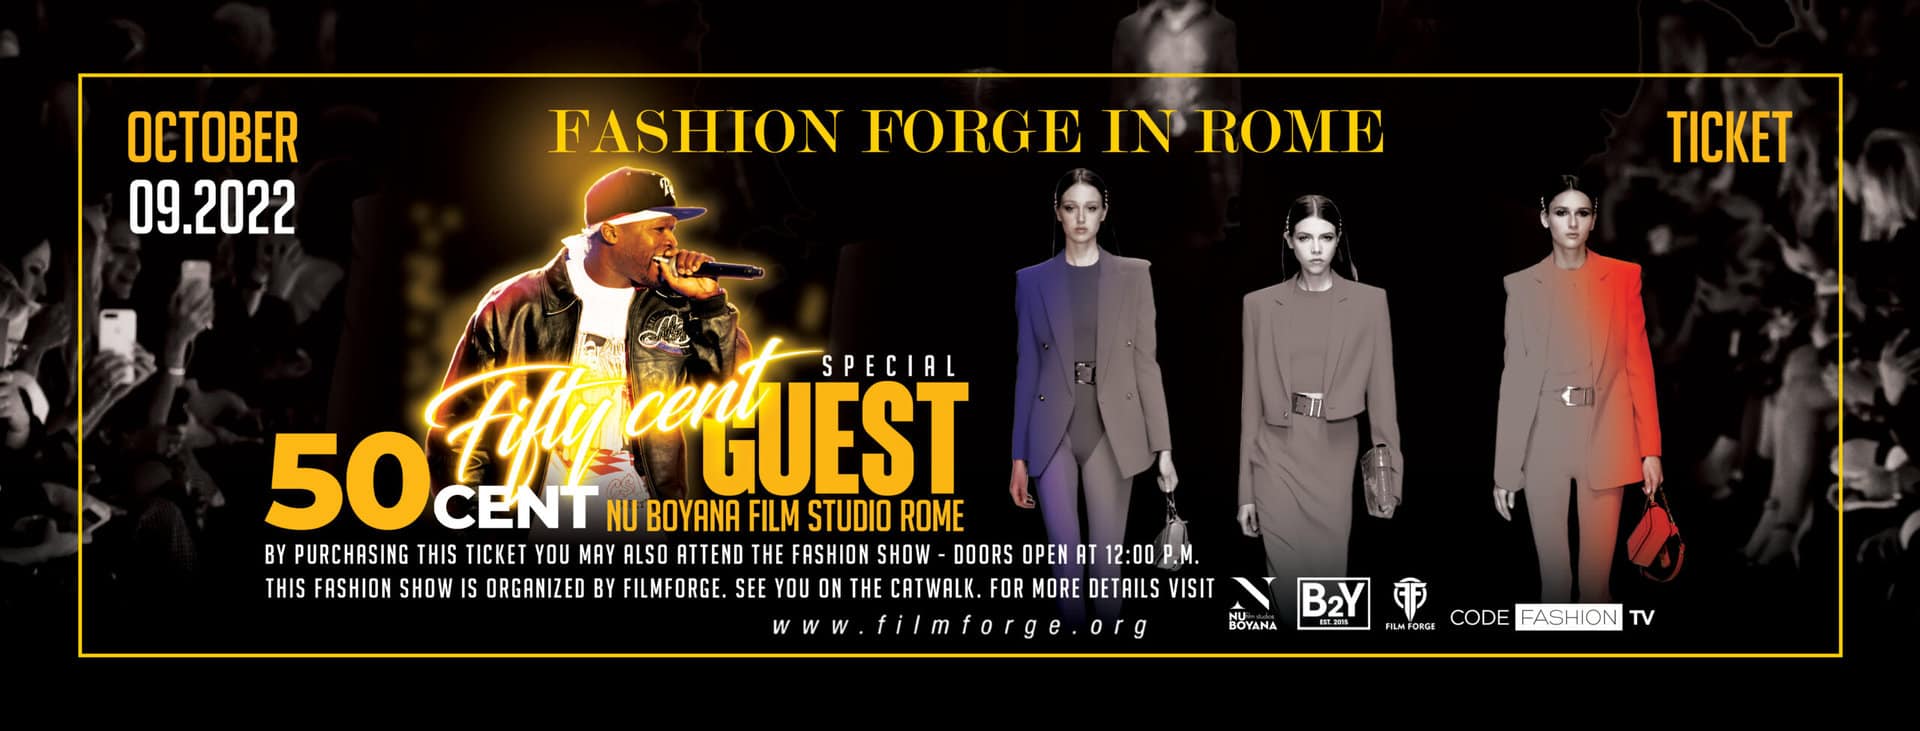 Fashion Forge in Rome